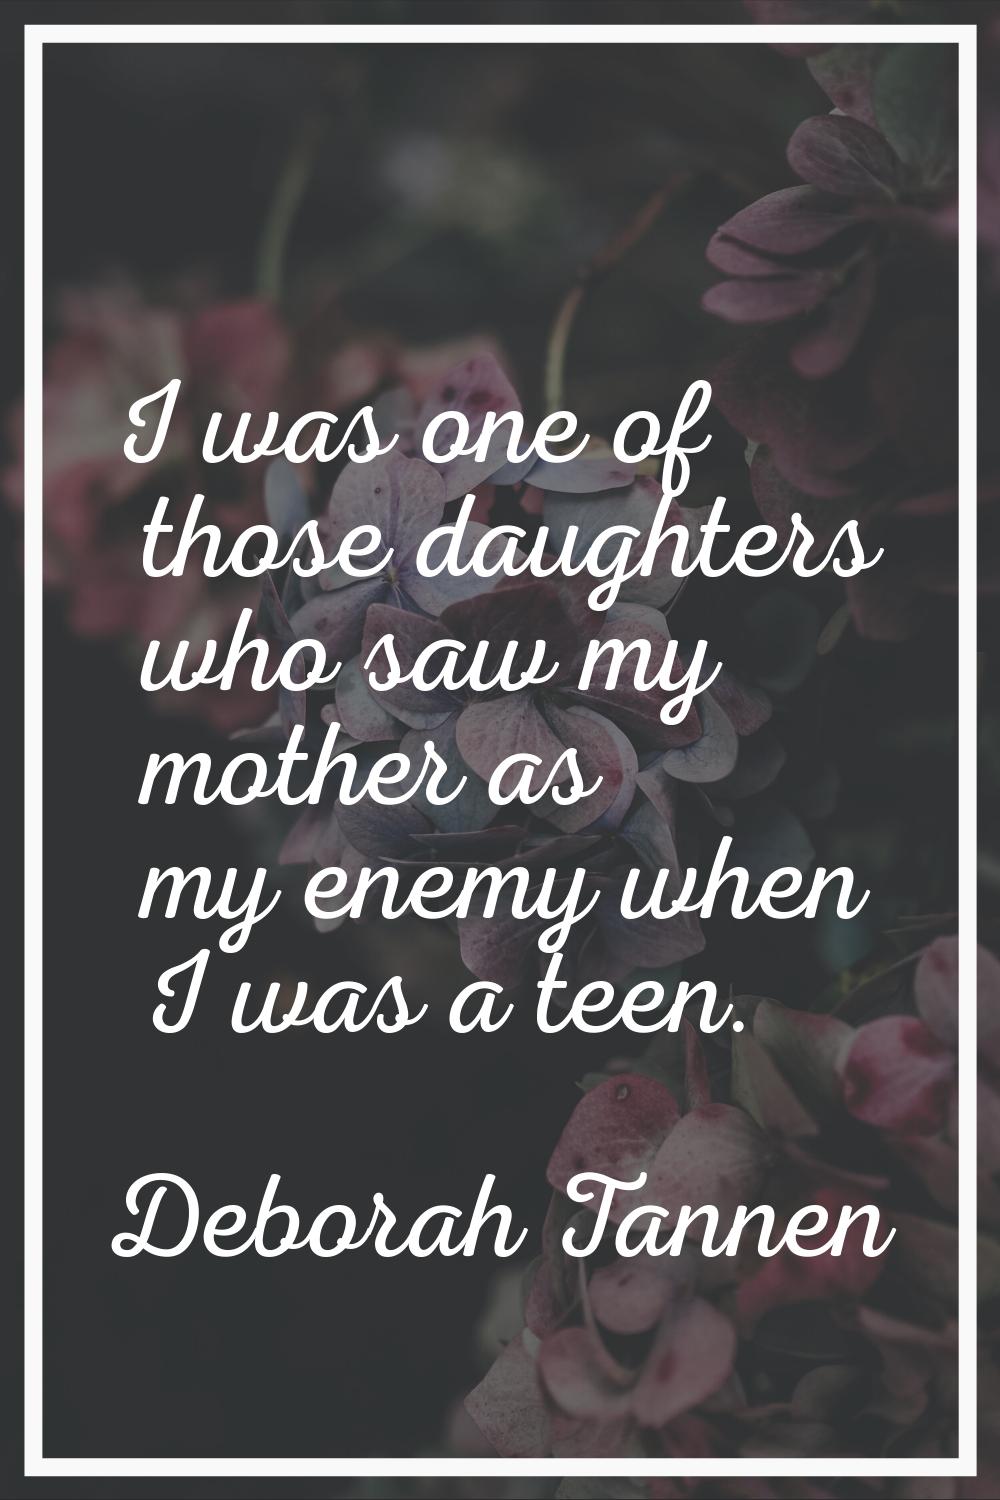 I was one of those daughters who saw my mother as my enemy when I was a teen.